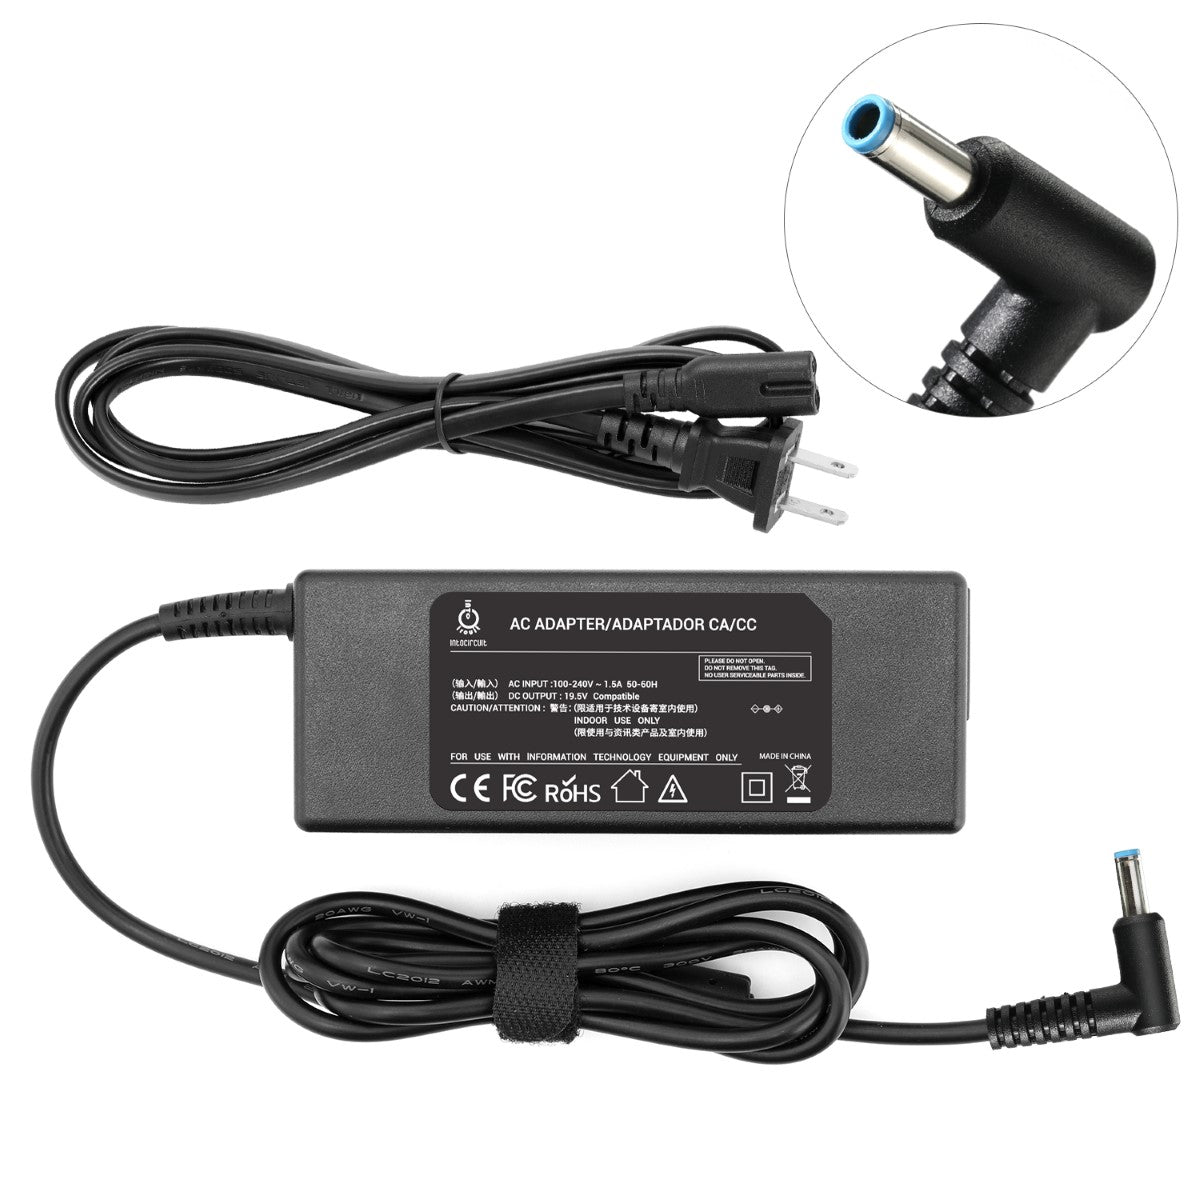 Charger for HP ENVY 15-u493cl x360 Laptop